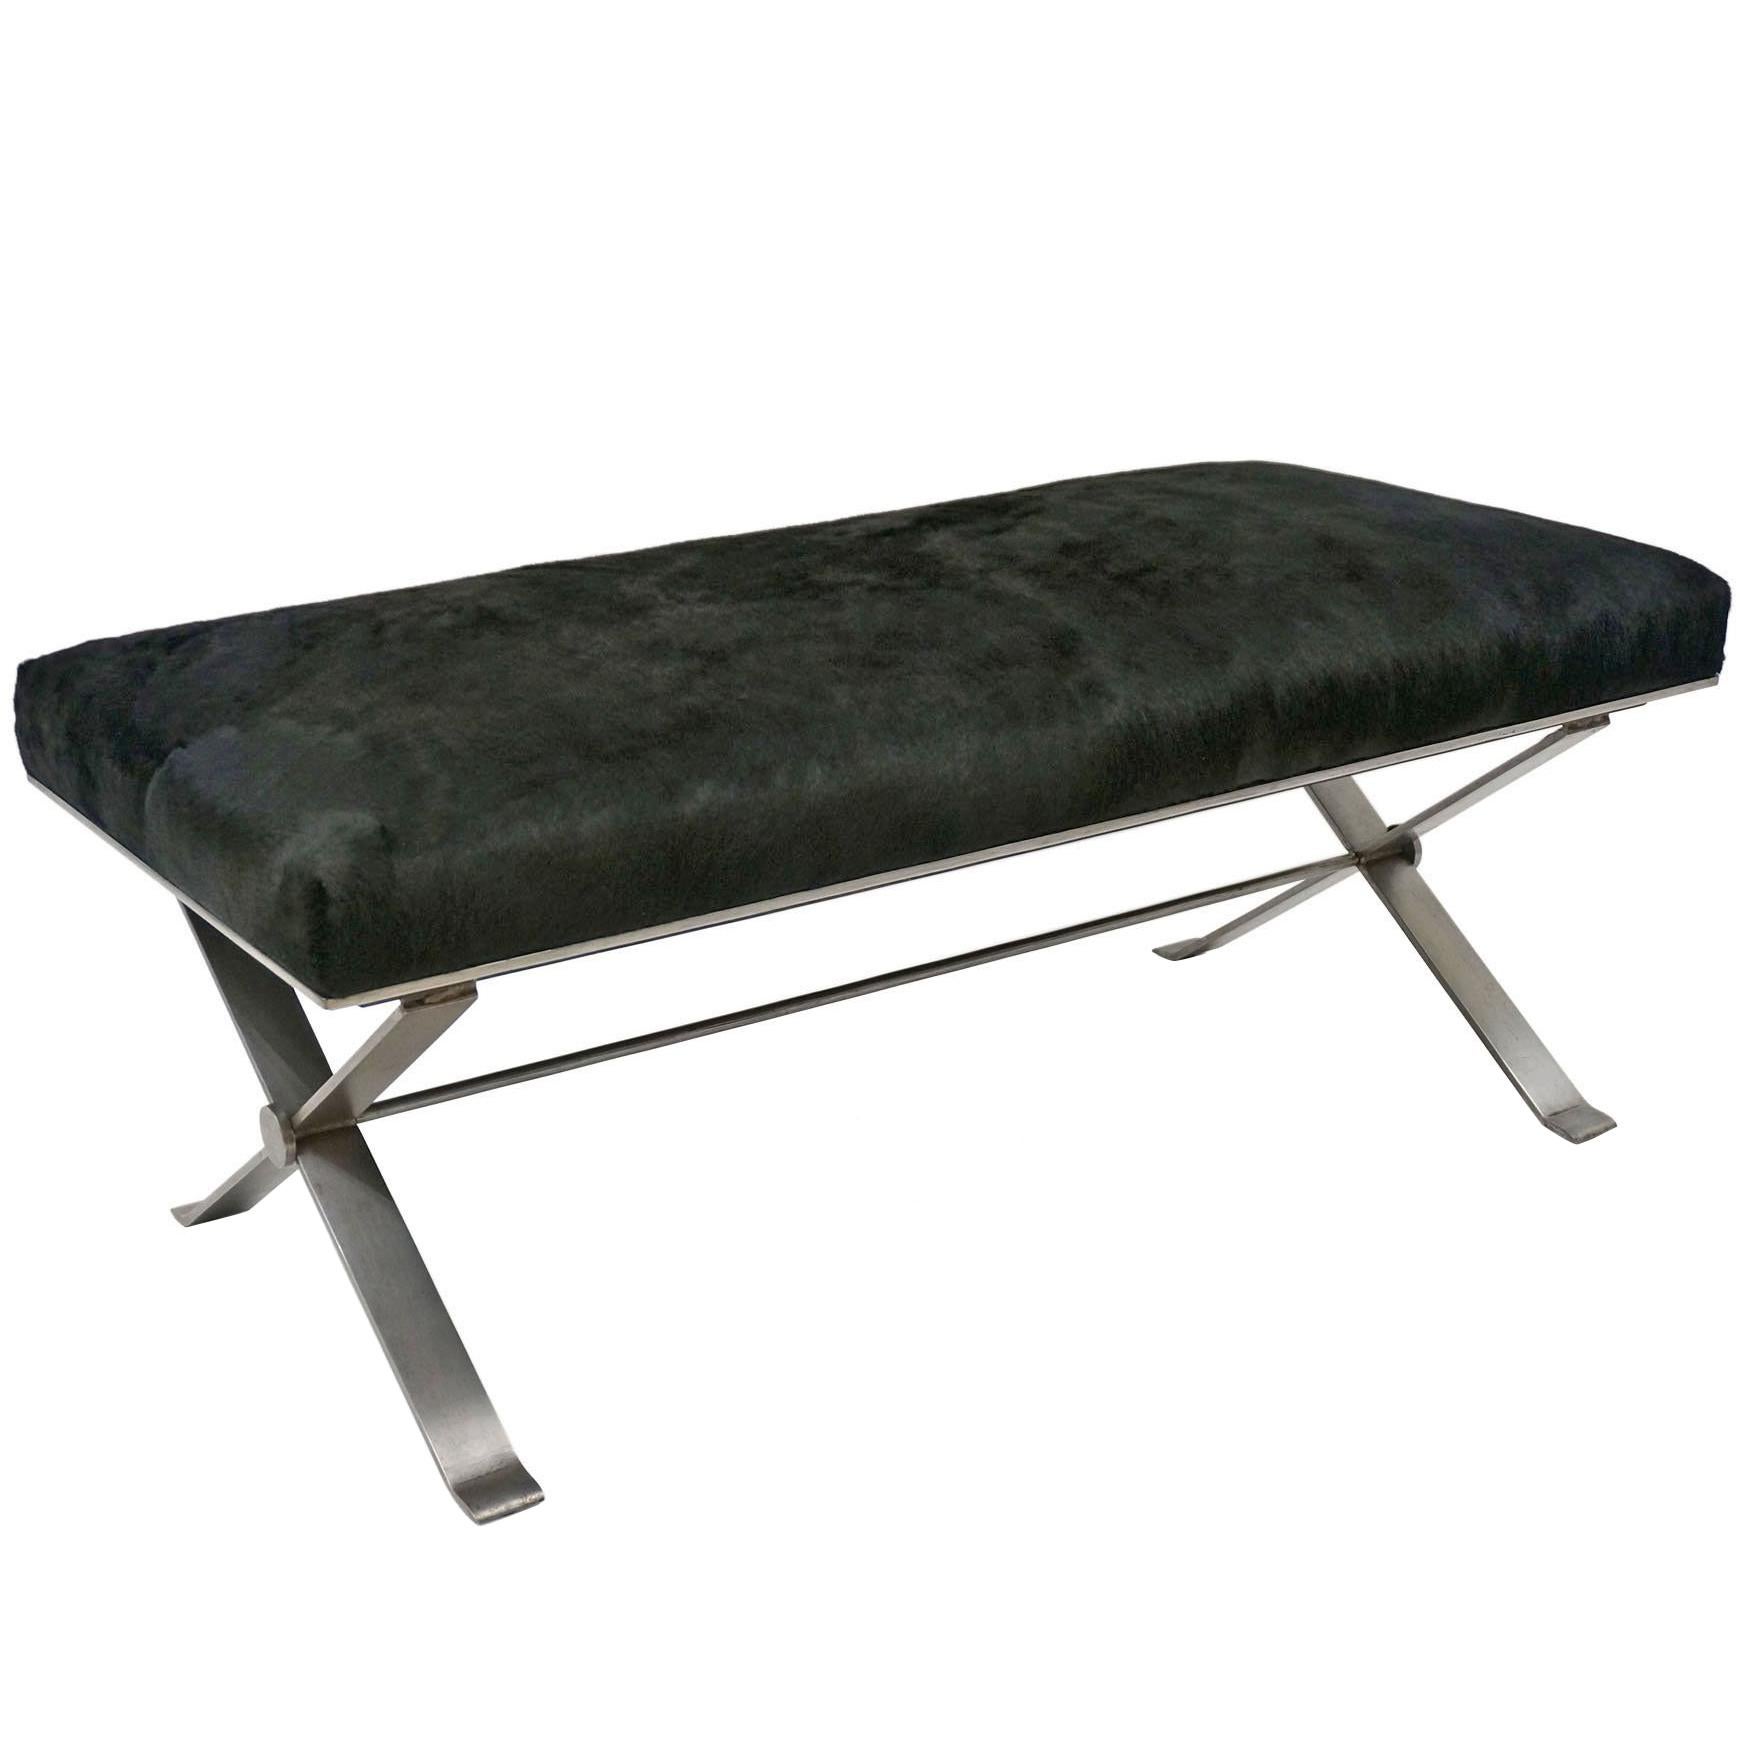 Midcentury Steel Bench with Black Horse Hair Seat, France, circa 1950 For Sale